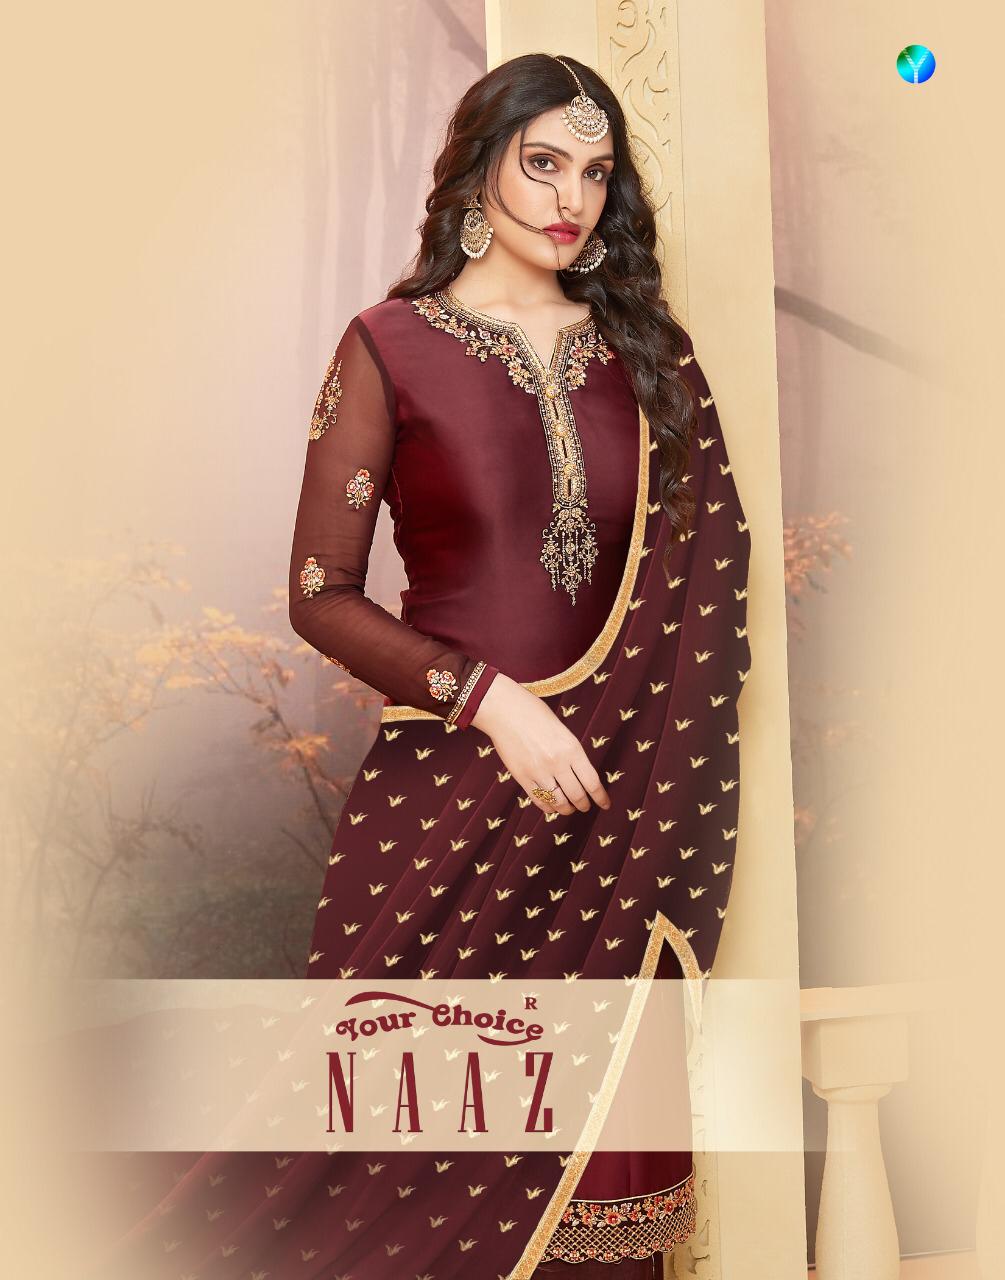 Your Choice Naaz Satin Georgette With Embroidery Work Dress ...